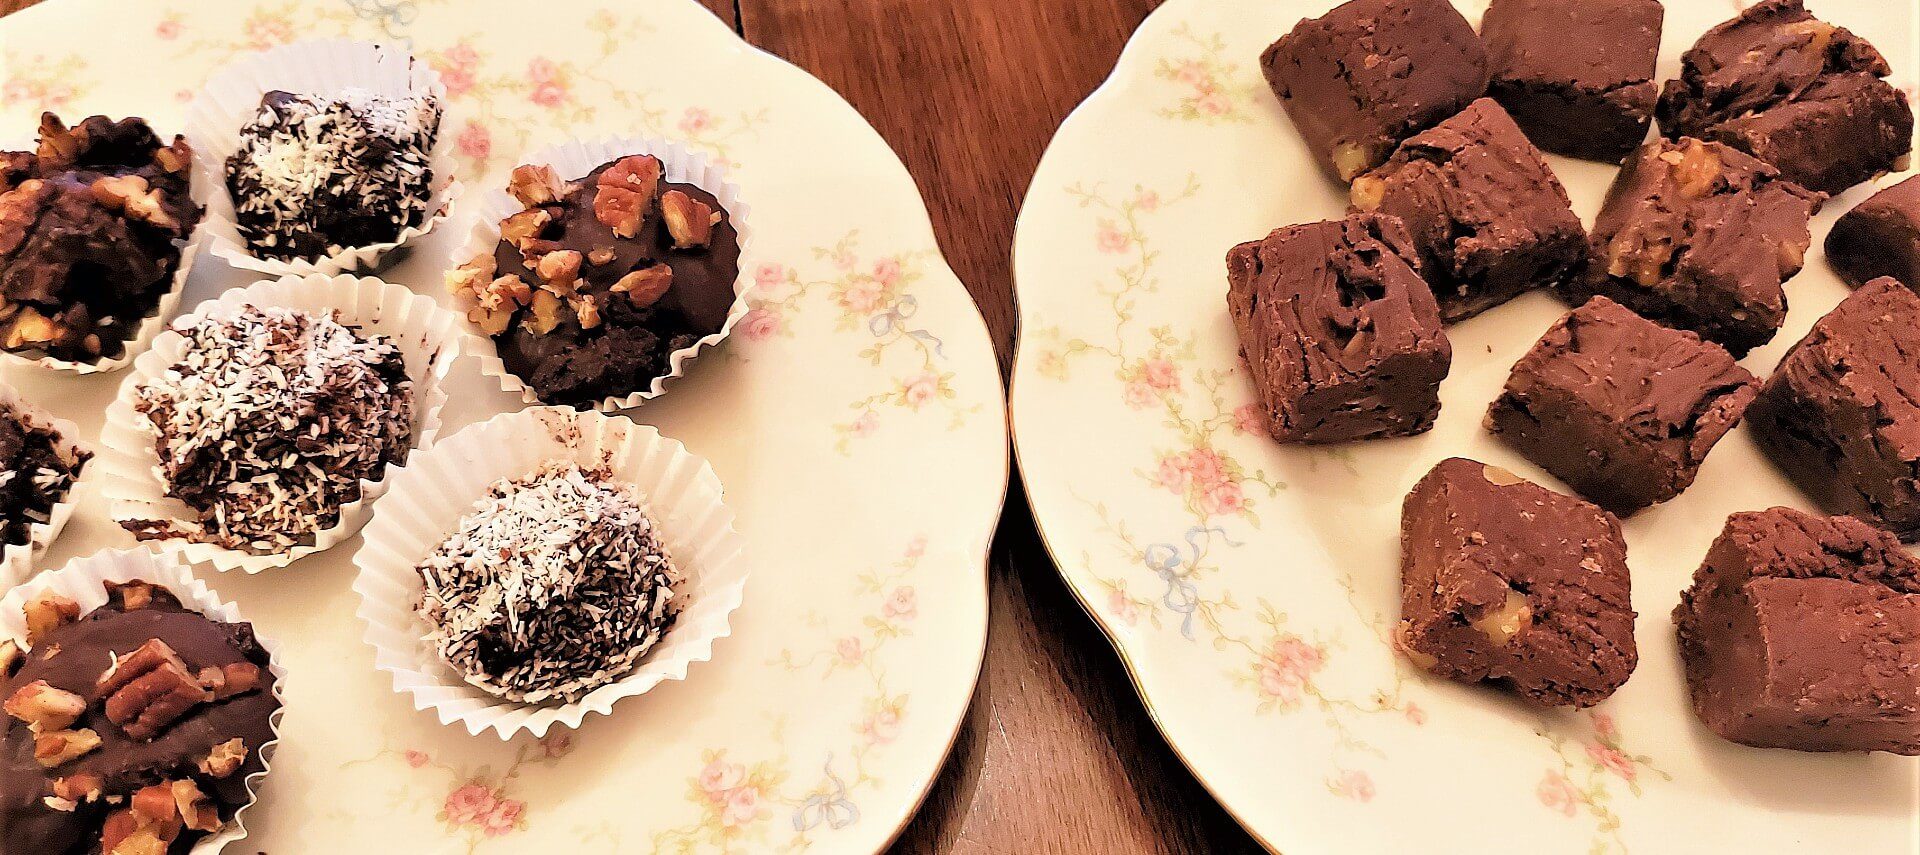 Two round white plates; one holding various chocolate truffles and the other chocolate brownies